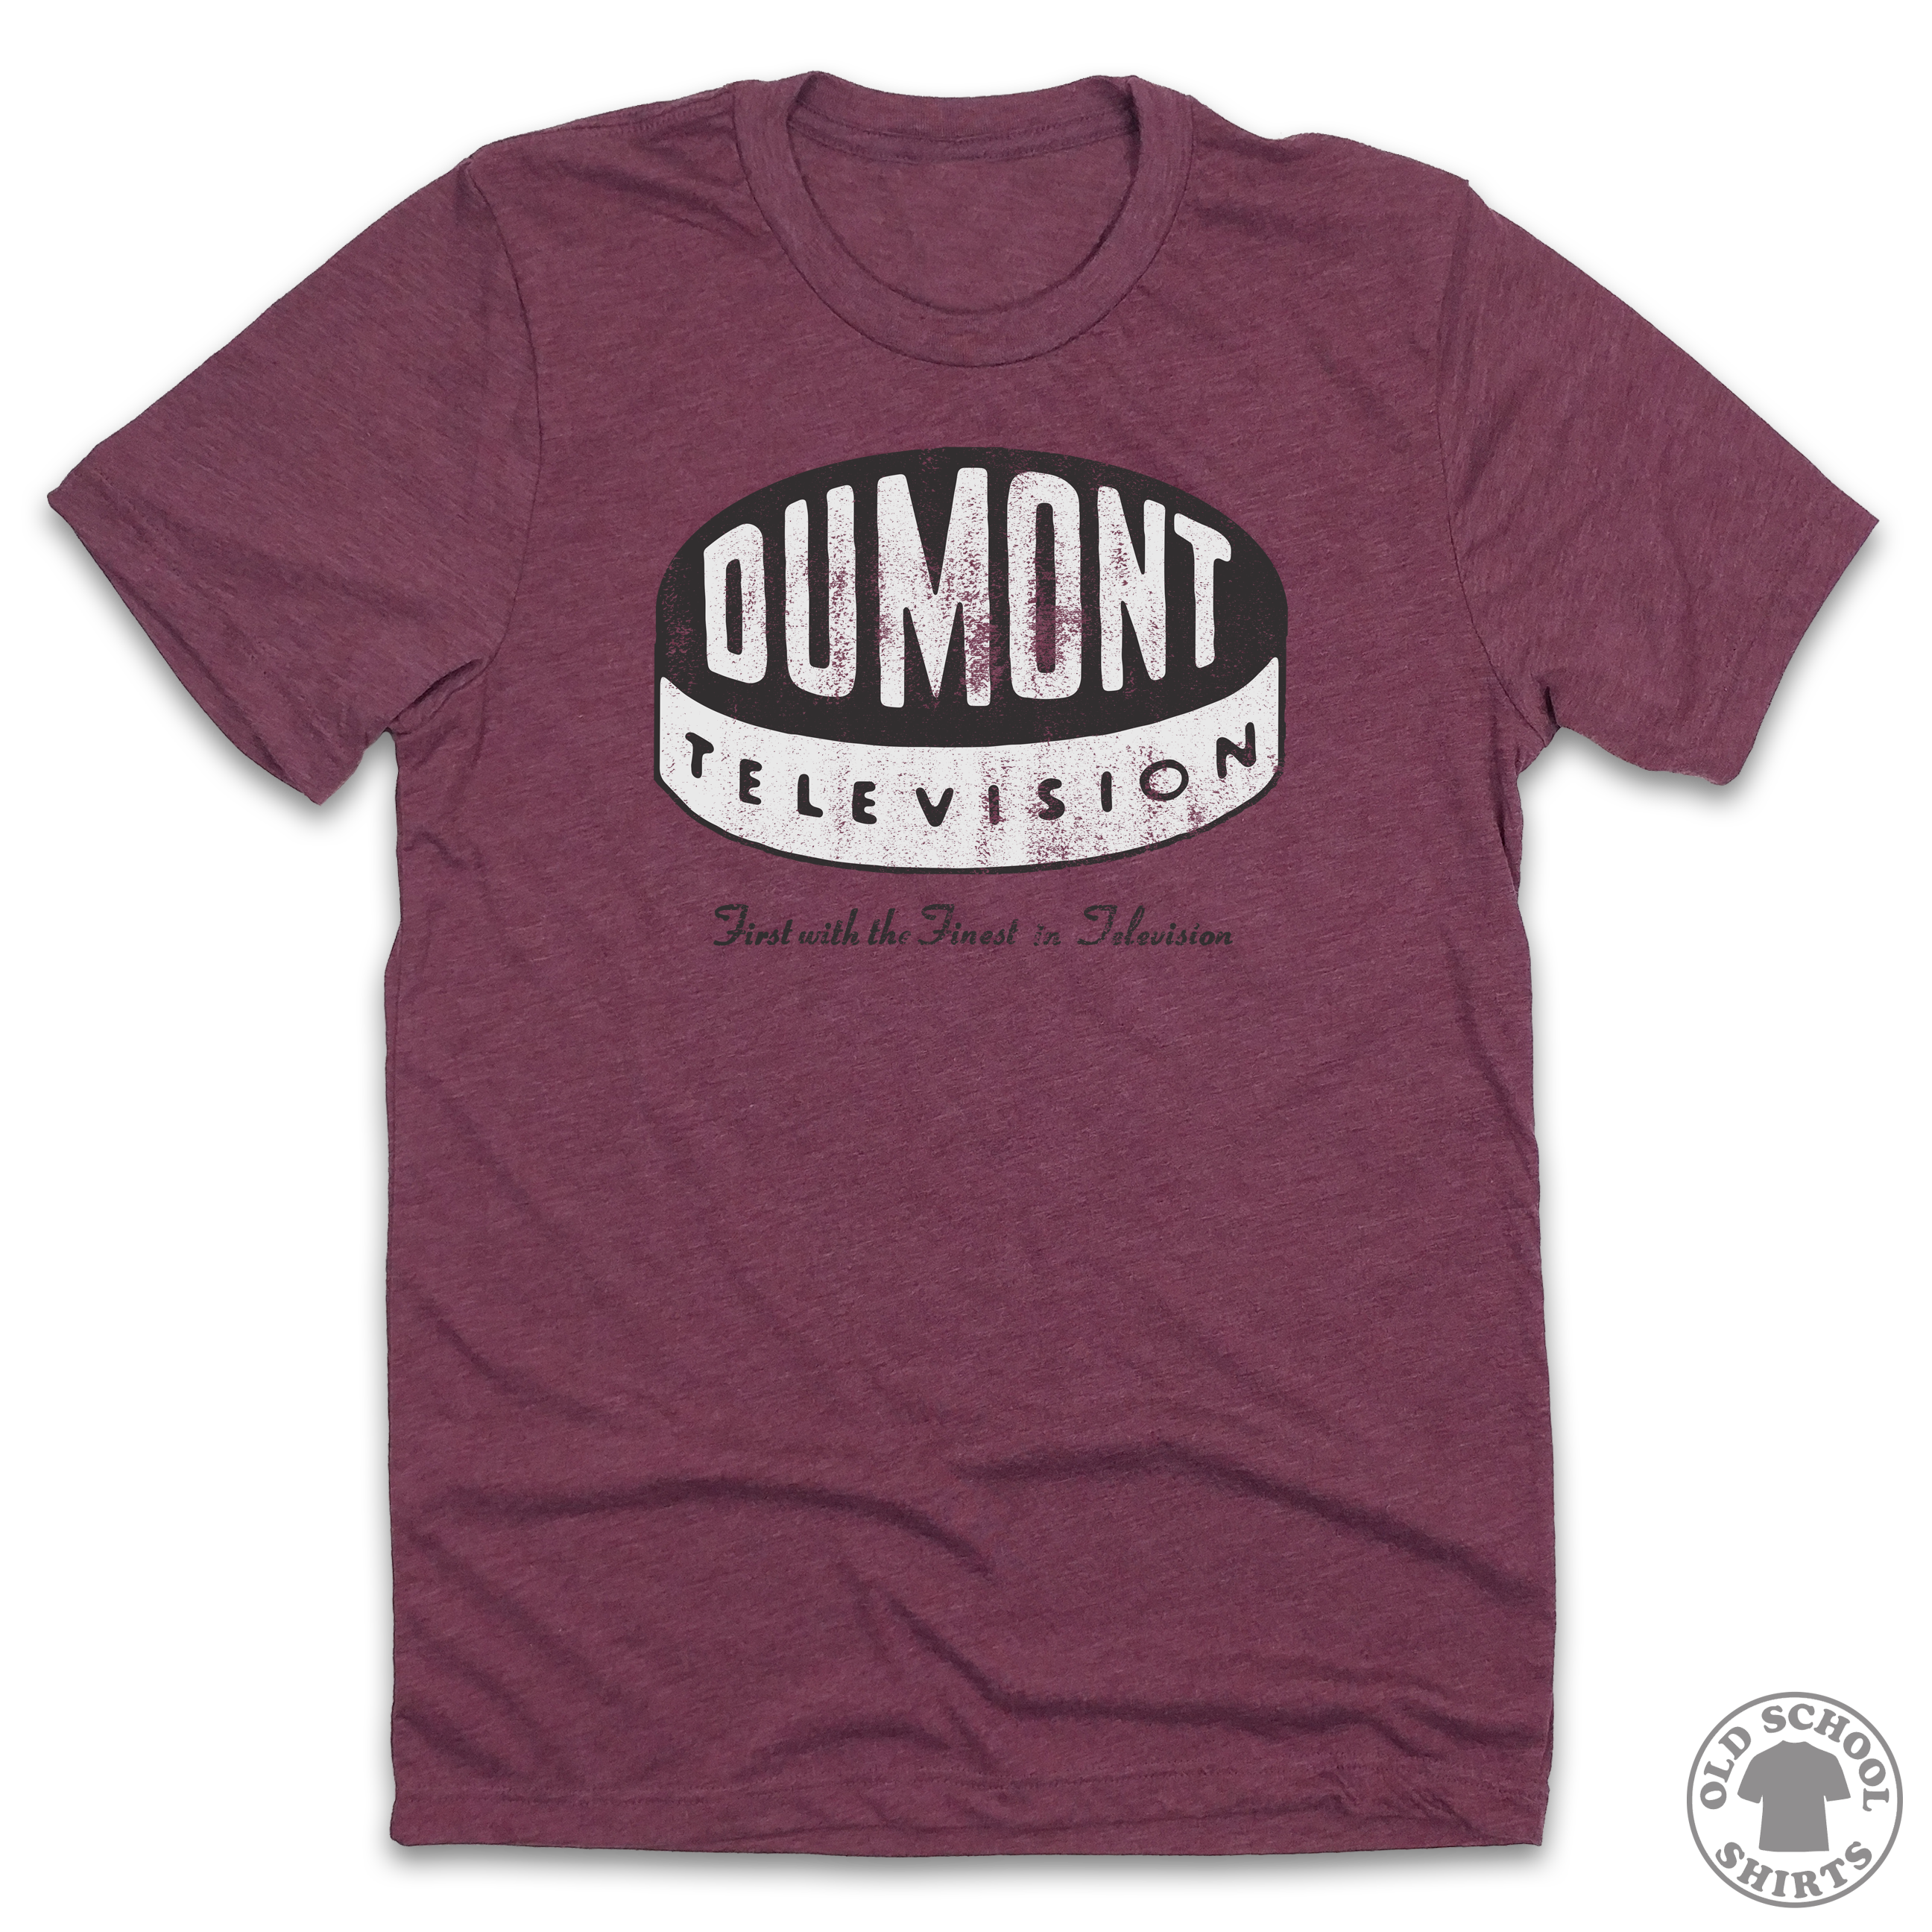 DuMont Television - Old School Shirts- Retro Sports T Shirts